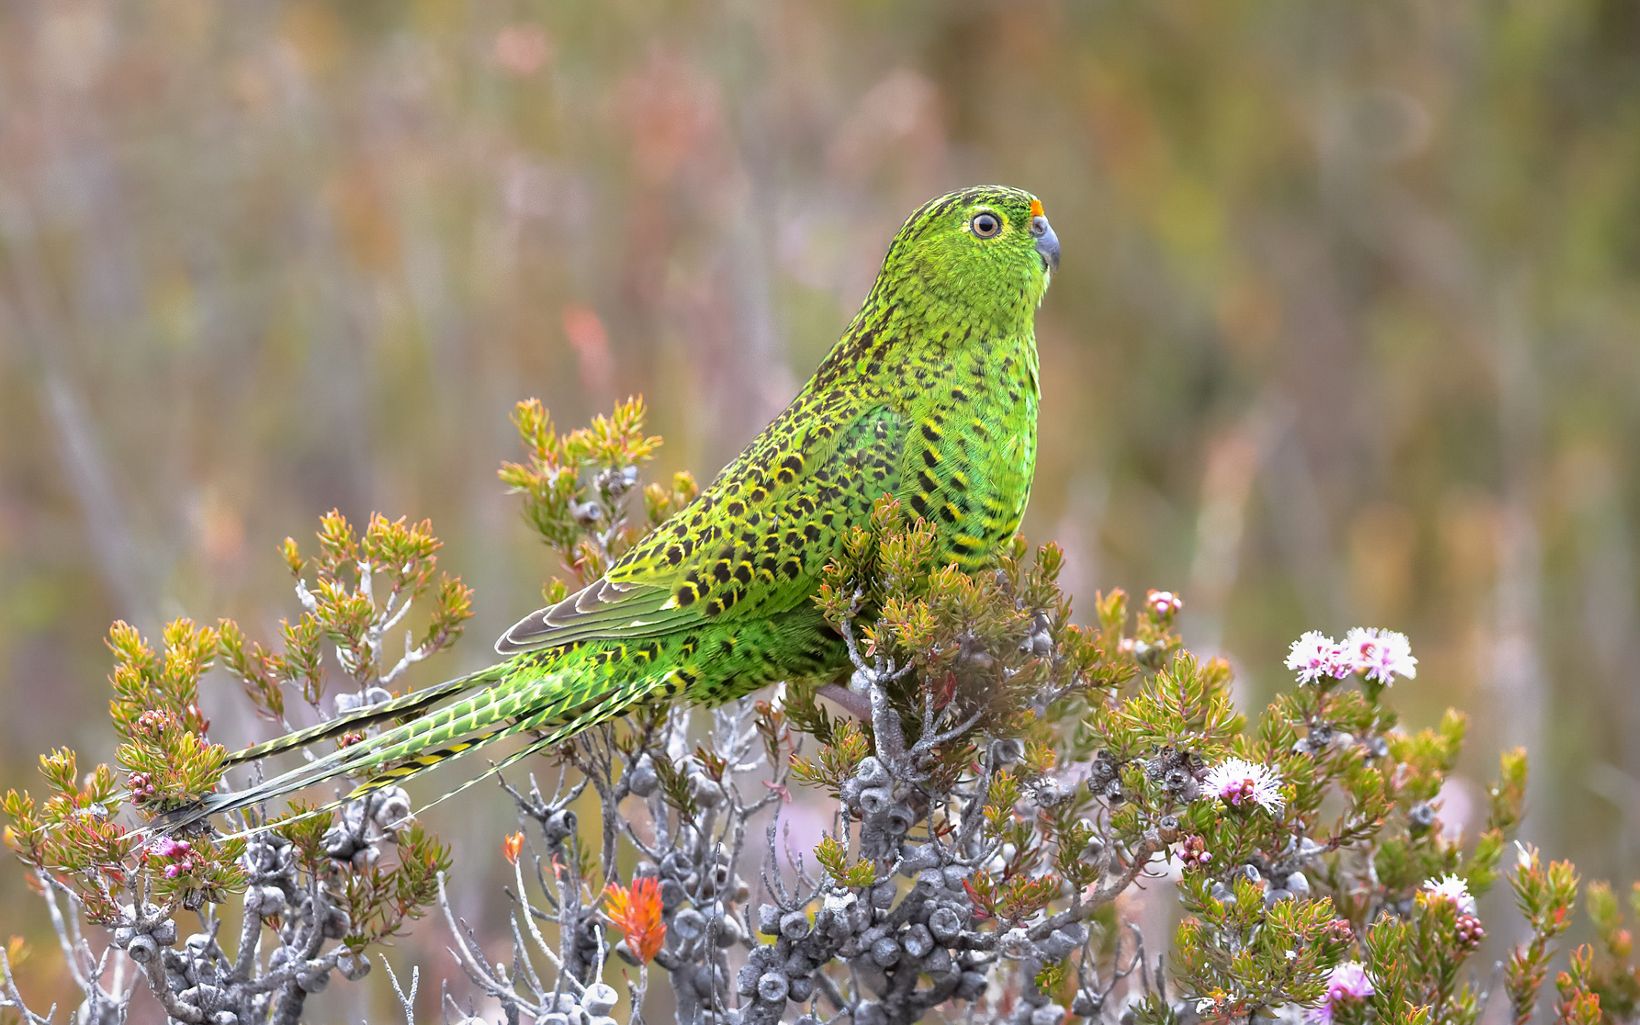 Eastern Ground Parrot has had much of its habitat destroyed by Australia's disastrous bushfire season in 2019/2020 that burnt 10 million hectares of habitat © Chris Young